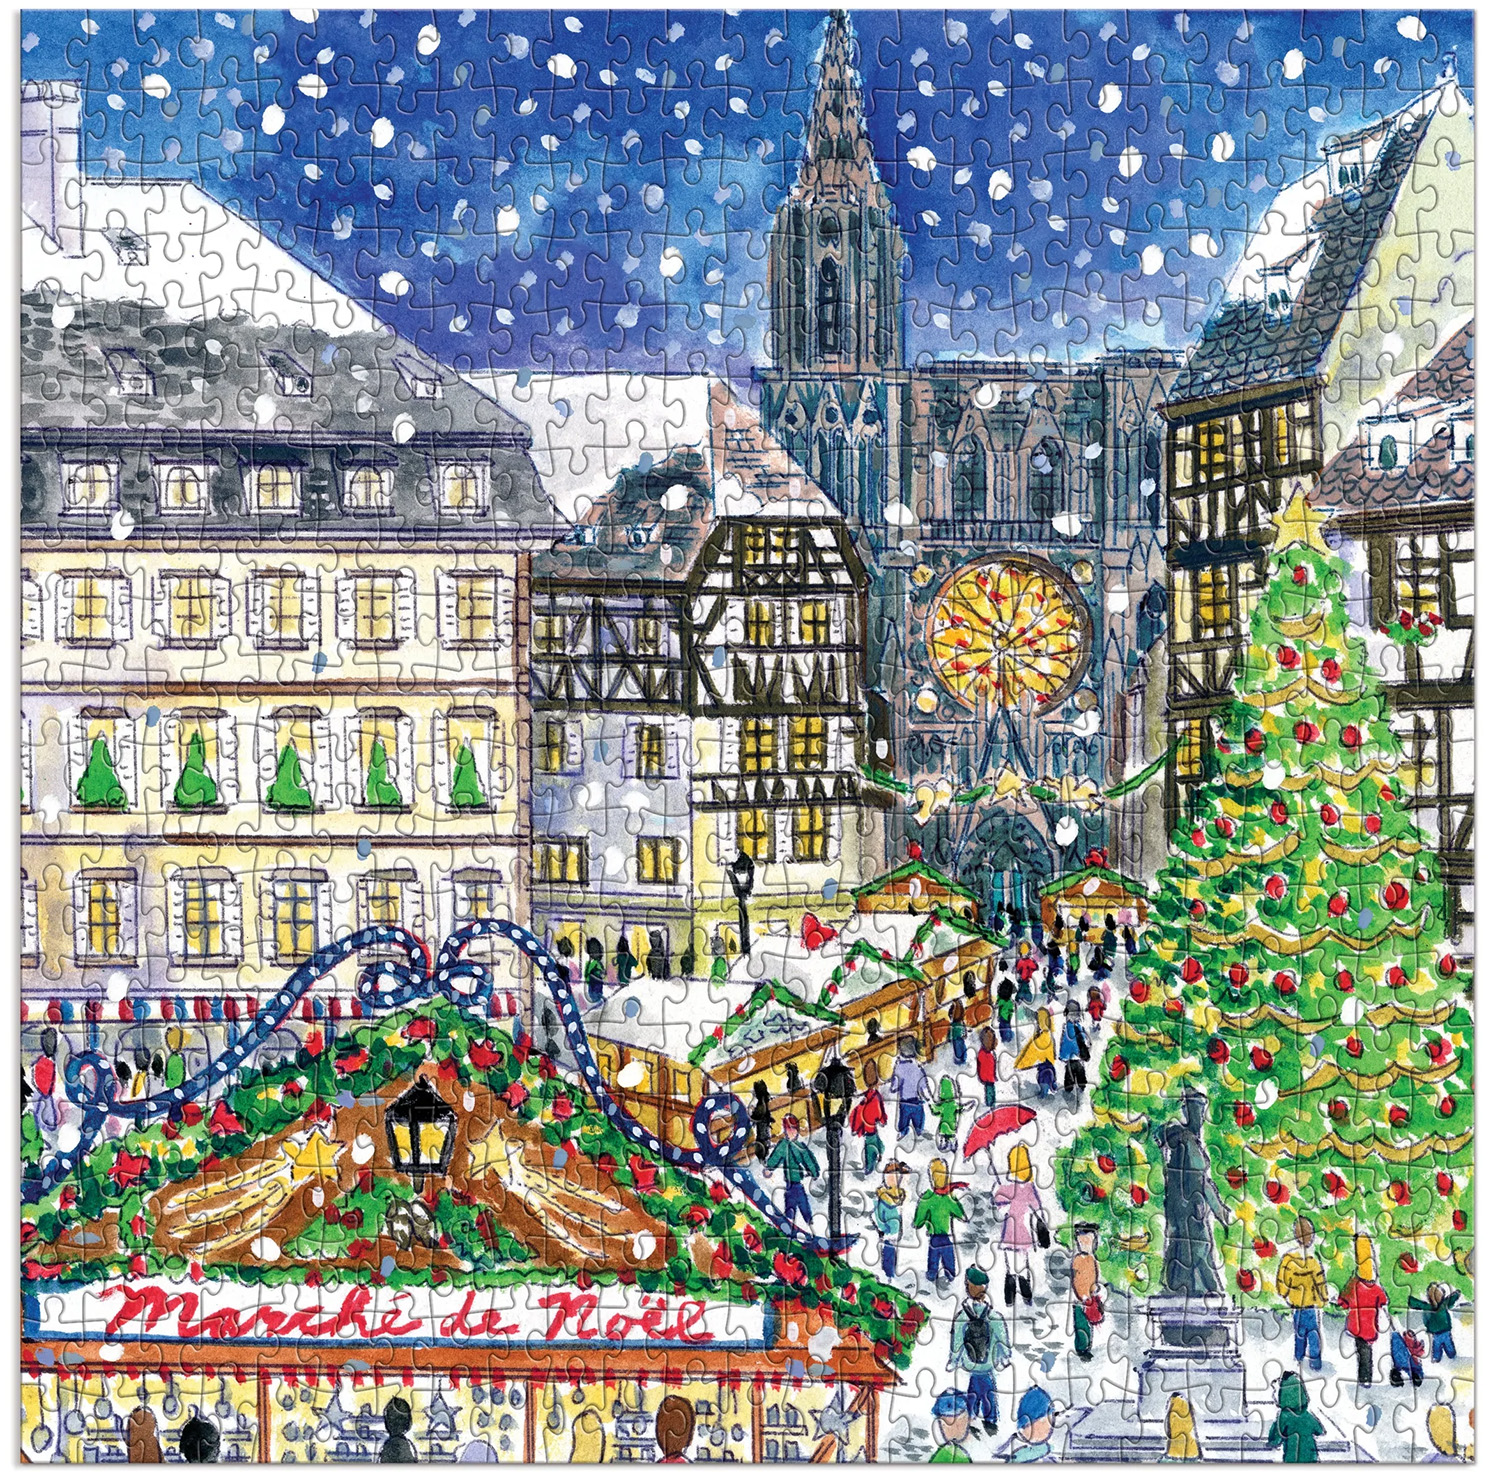 Christmas in France Winter Jigsaw Puzzle